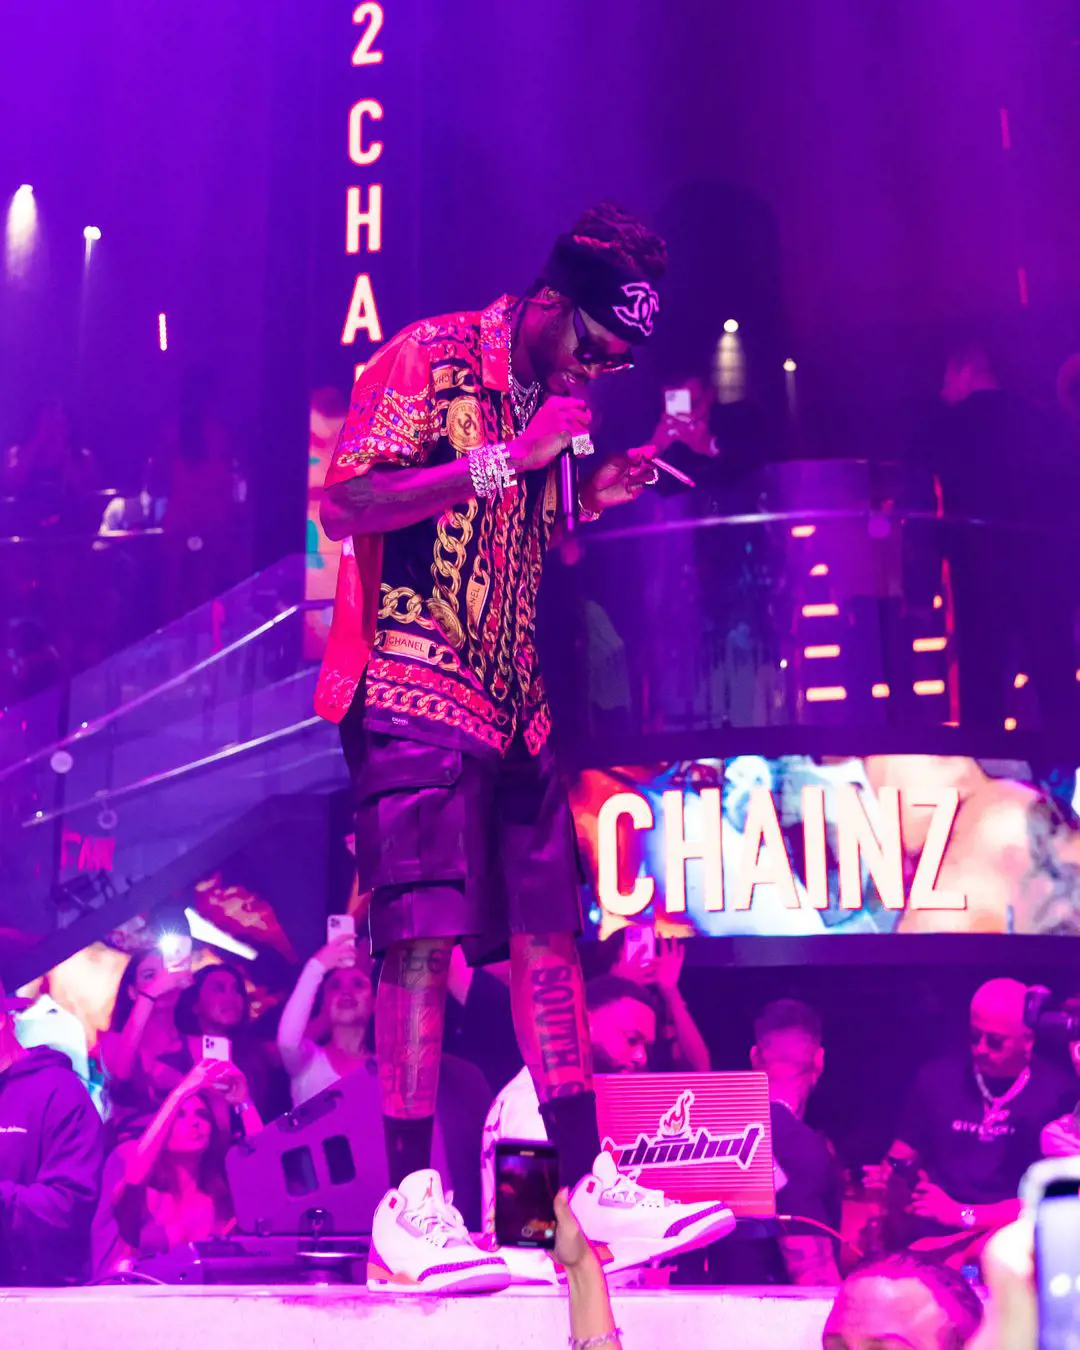 2 Chainz performing at LIV live for his fans